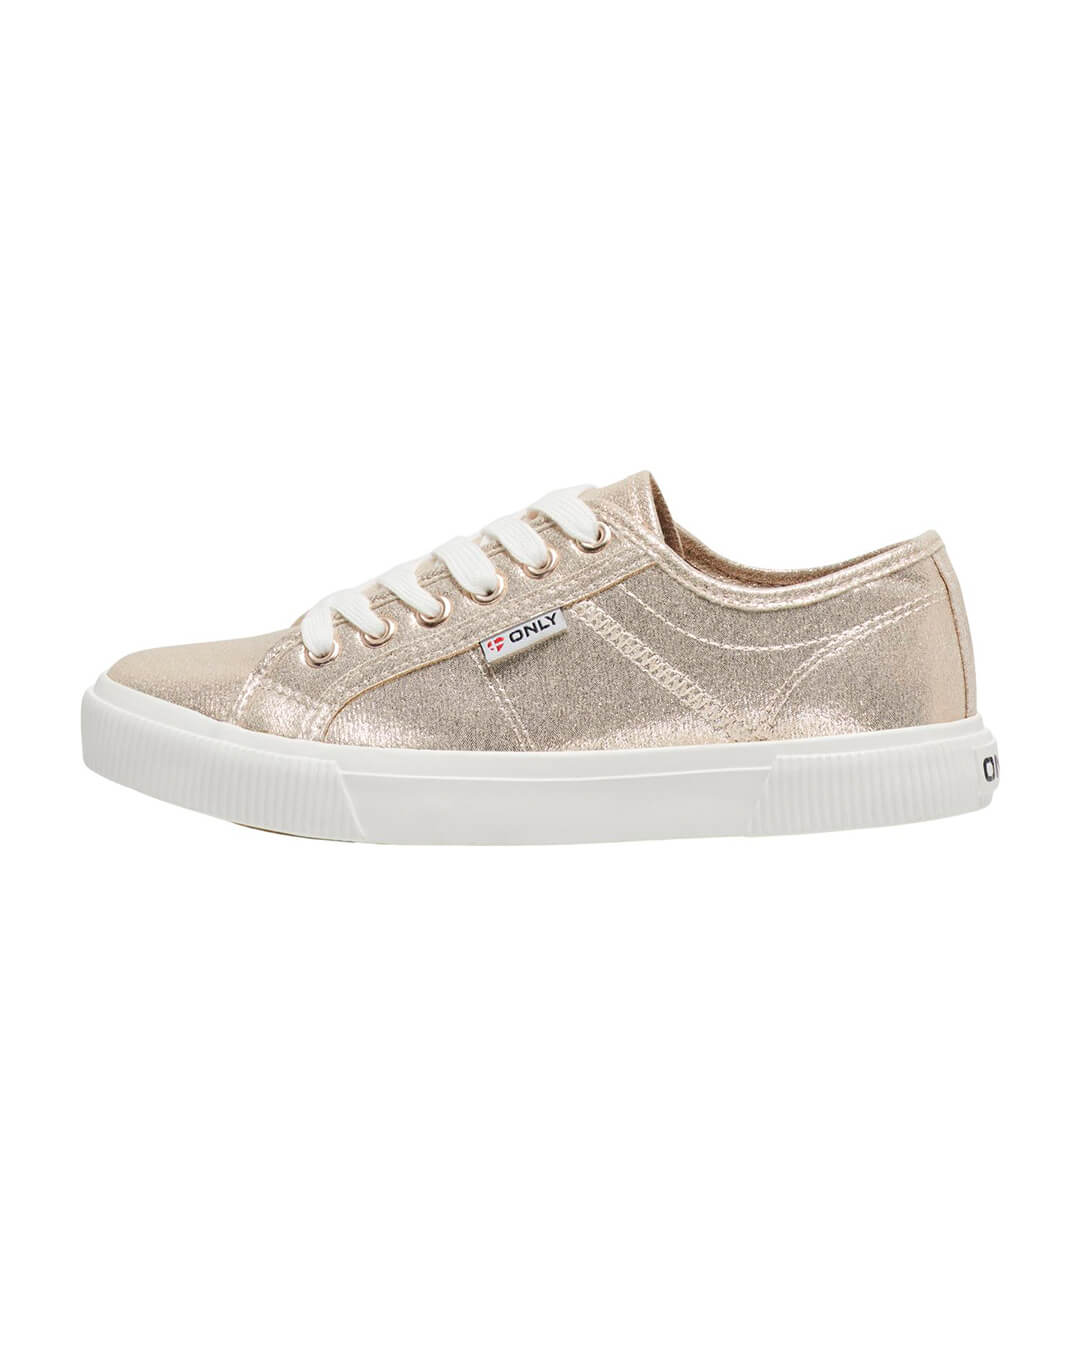 Only Shoes Only Metallic Gold Canvas Sneakers